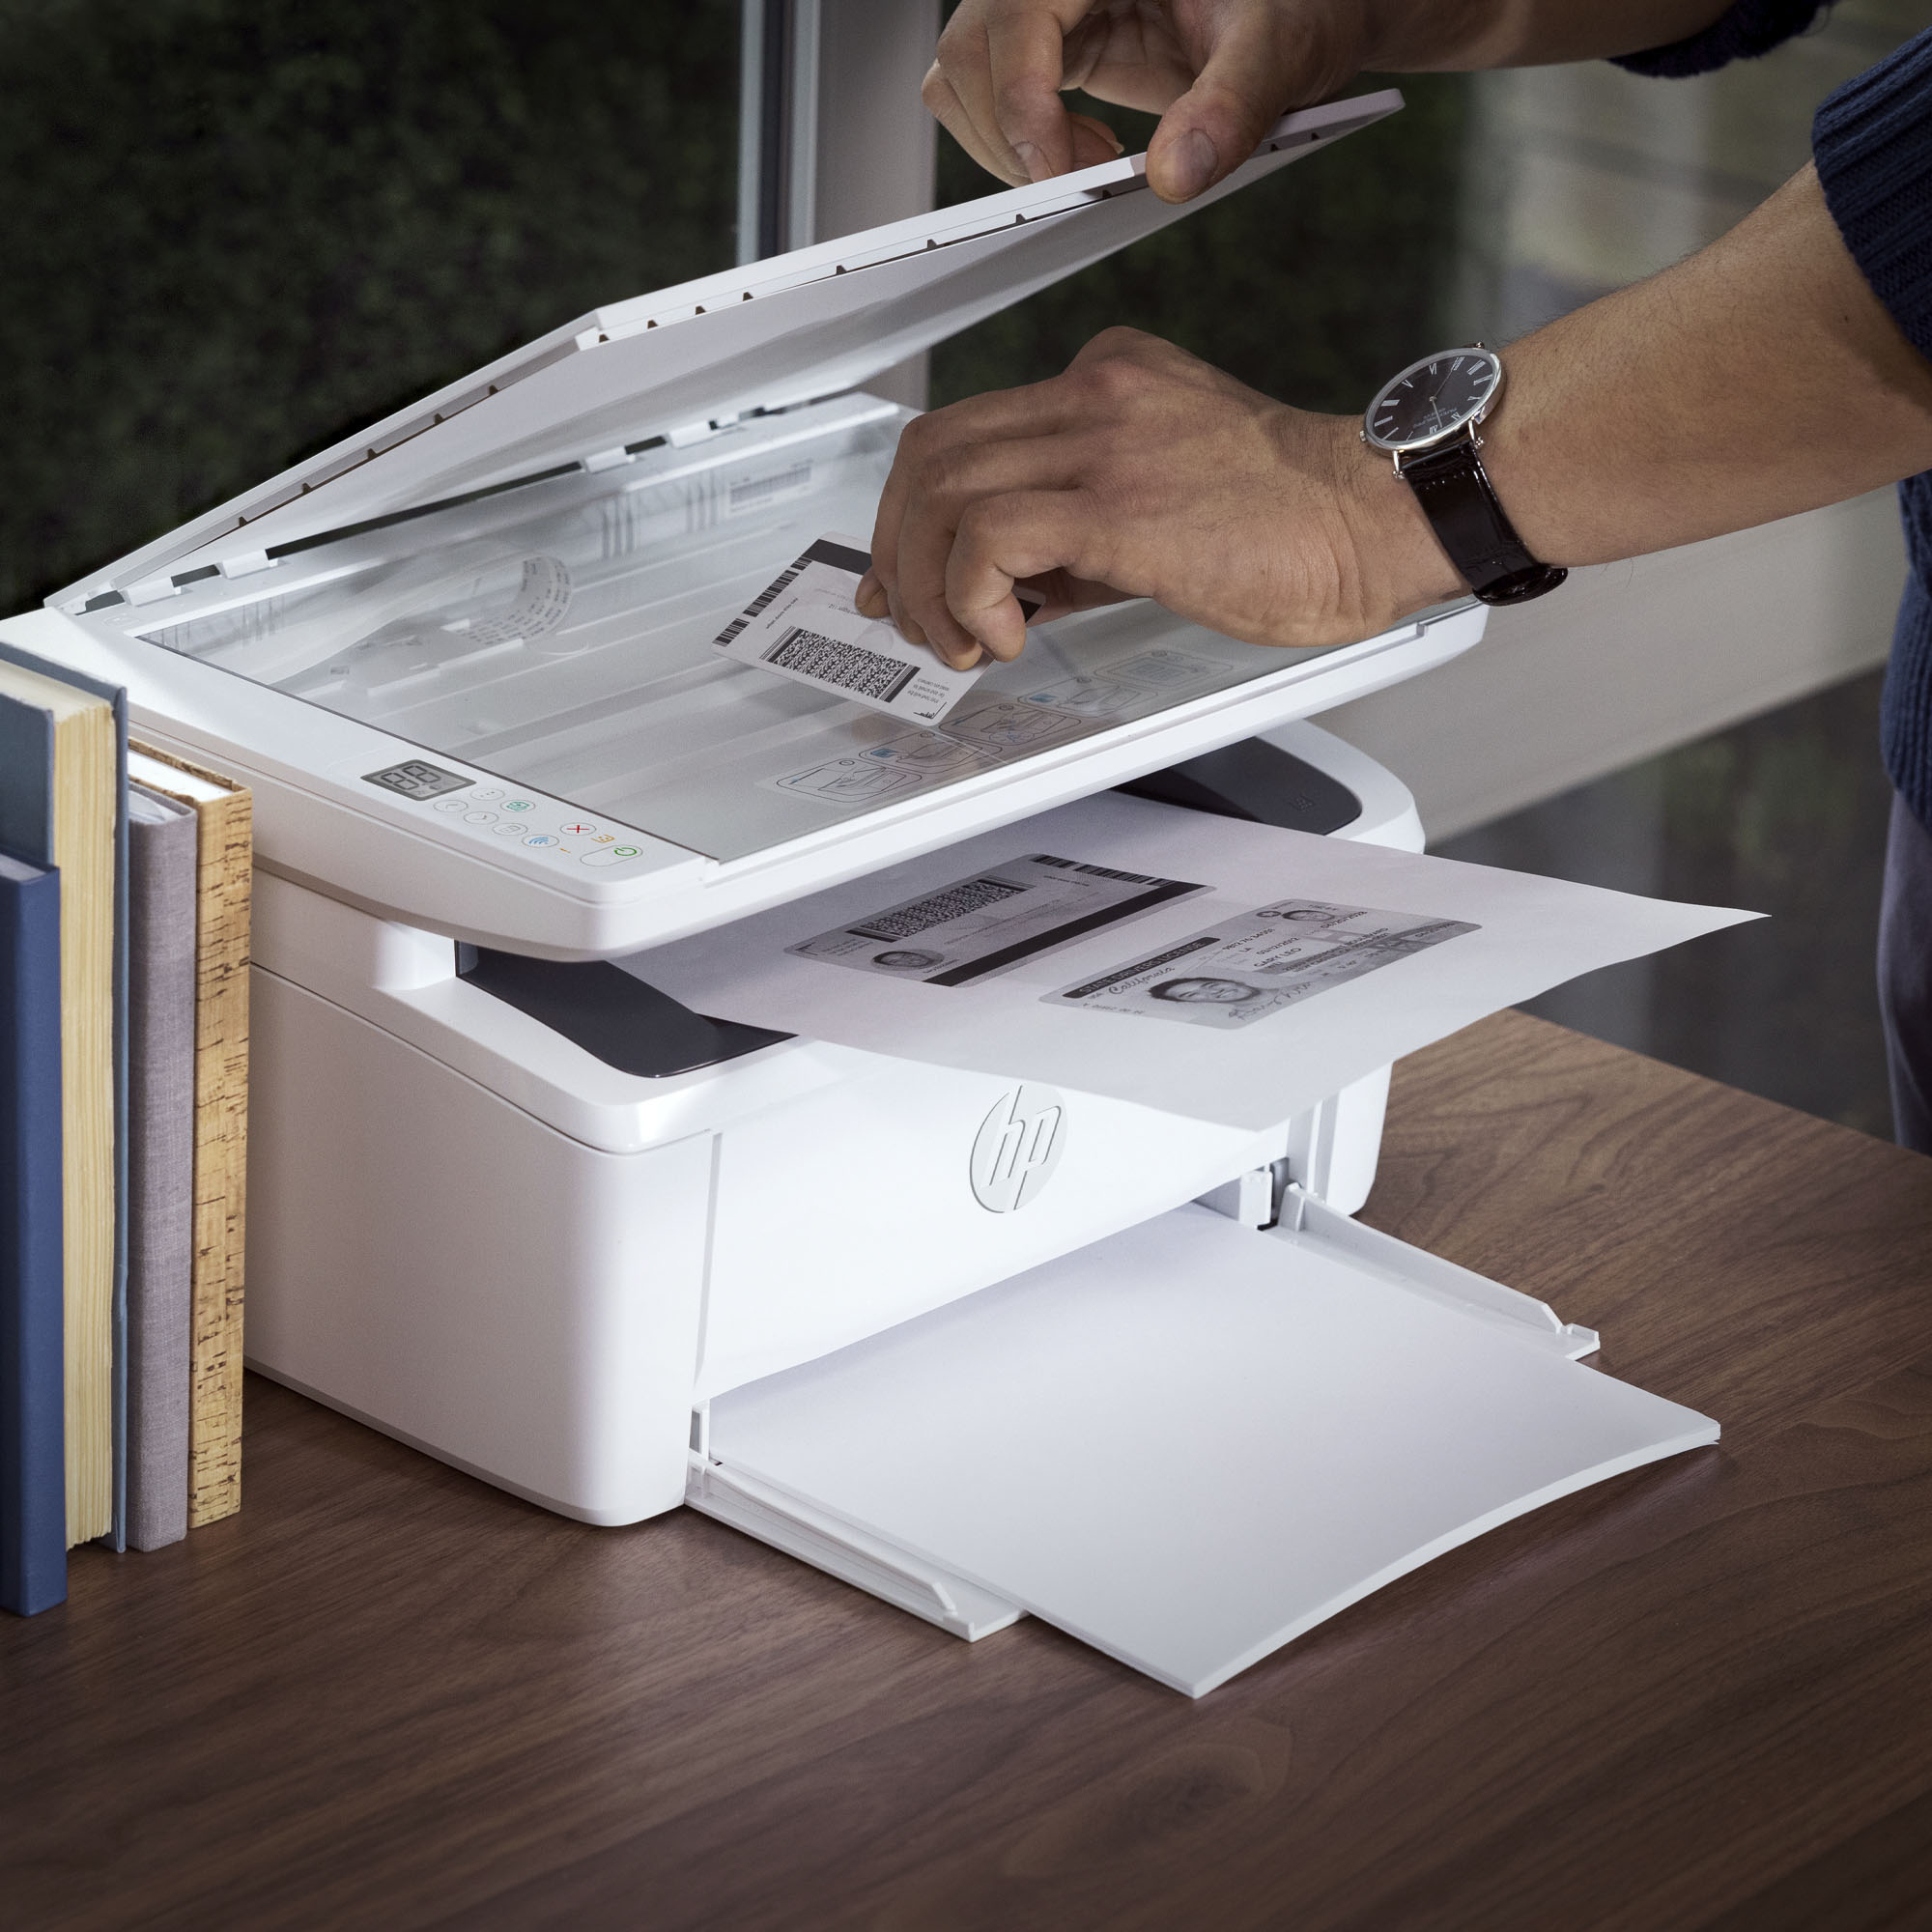 HP LaserJet M140we Wireless Black and White Laser Printer with 6 months of Instant  Ink included with HP+ White LaserJet M140we - Best Buy